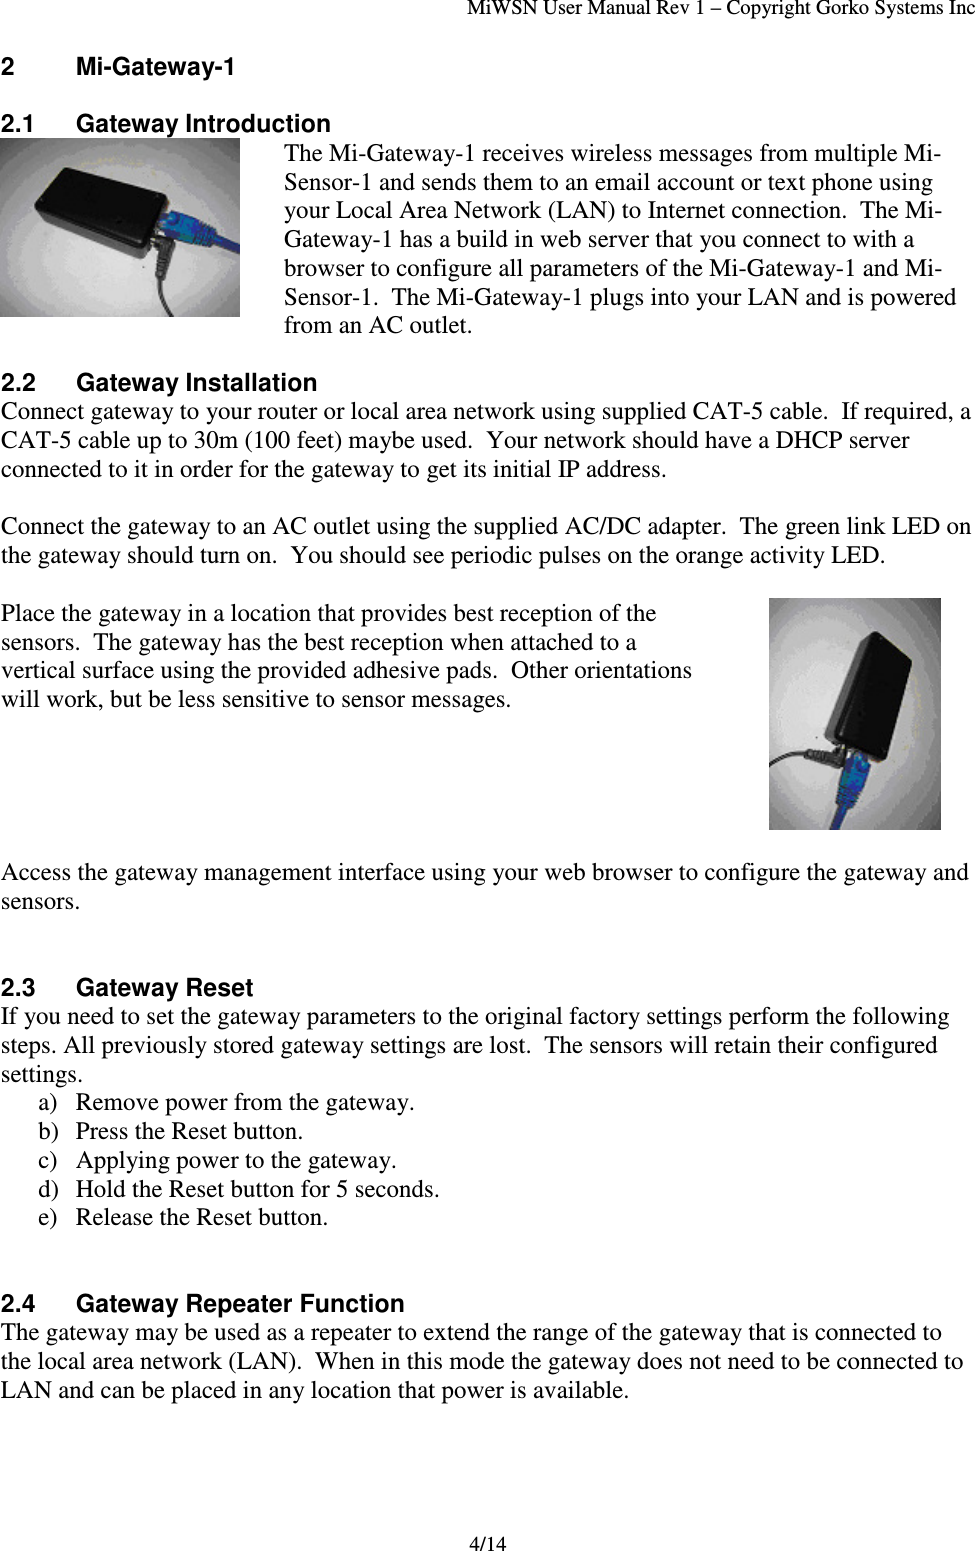 MiWSN User Manual Rev 1 – Copyright Gorko Systems Inc4/142 Mi-Gateway-12.1 Gateway IntroductionThe Mi-Gateway-1 receives wireless messages from multiple Mi-Sensor-1 and sends them to an email account or text phone usingyour Local Area Network (LAN) to Internet connection.  The Mi-Gateway-1 has a build in web server that you connect to with abrowser to configure all parameters of the Mi-Gateway-1 and Mi-Sensor-1.  The Mi-Gateway-1 plugs into your LAN and is poweredfrom an AC outlet.2.2 Gateway InstallationConnect gateway to your router or local area network using supplied CAT-5 cable.  If required, aCAT-5 cable up to 30m (100 feet) maybe used.  Your network should have a DHCP serverconnected to it in order for the gateway to get its initial IP address.Connect the gateway to an AC outlet using the supplied AC/DC adapter.  The green link LED onthe gateway should turn on.  You should see periodic pulses on the orange activity LED.Place the gateway in a location that provides best reception of thesensors.  The gateway has the best reception when attached to avertical surface using the provided adhesive pads.  Other orientationswill work, but be less sensitive to sensor messages.Access the gateway management interface using your web browser to configure the gateway andsensors.2.3 Gateway ResetIf you need to set the gateway parameters to the original factory settings perform the followingsteps. All previously stored gateway settings are lost.  The sensors will retain their configuredsettings.a) Remove power from the gateway.b) Press the Reset button.c) Applying power to the gateway.d) Hold the Reset button for 5 seconds.e) Release the Reset button.2.4 Gateway Repeater FunctionThe gateway may be used as a repeater to extend the range of the gateway that is connected tothe local area network (LAN).  When in this mode the gateway does not need to be connected toLAN and can be placed in any location that power is available.